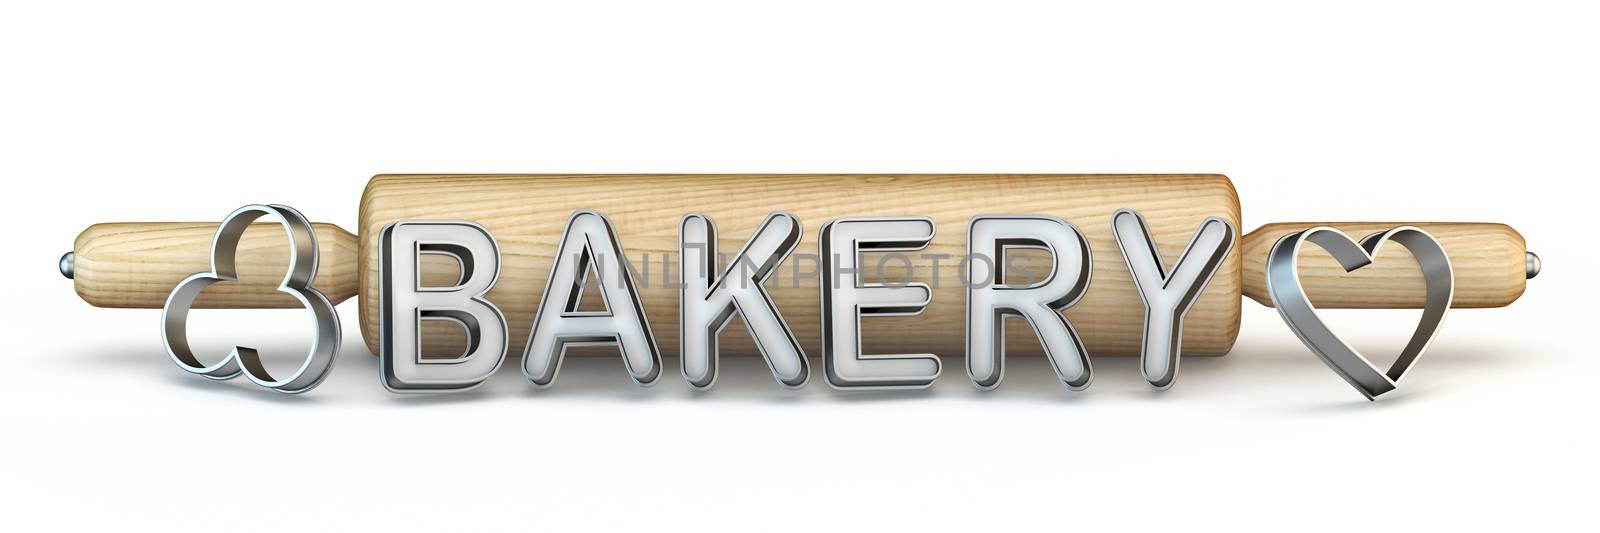 Wooden rolling pin, BAKERY text and cookie cutter 3D rendering illustration isolated on white background